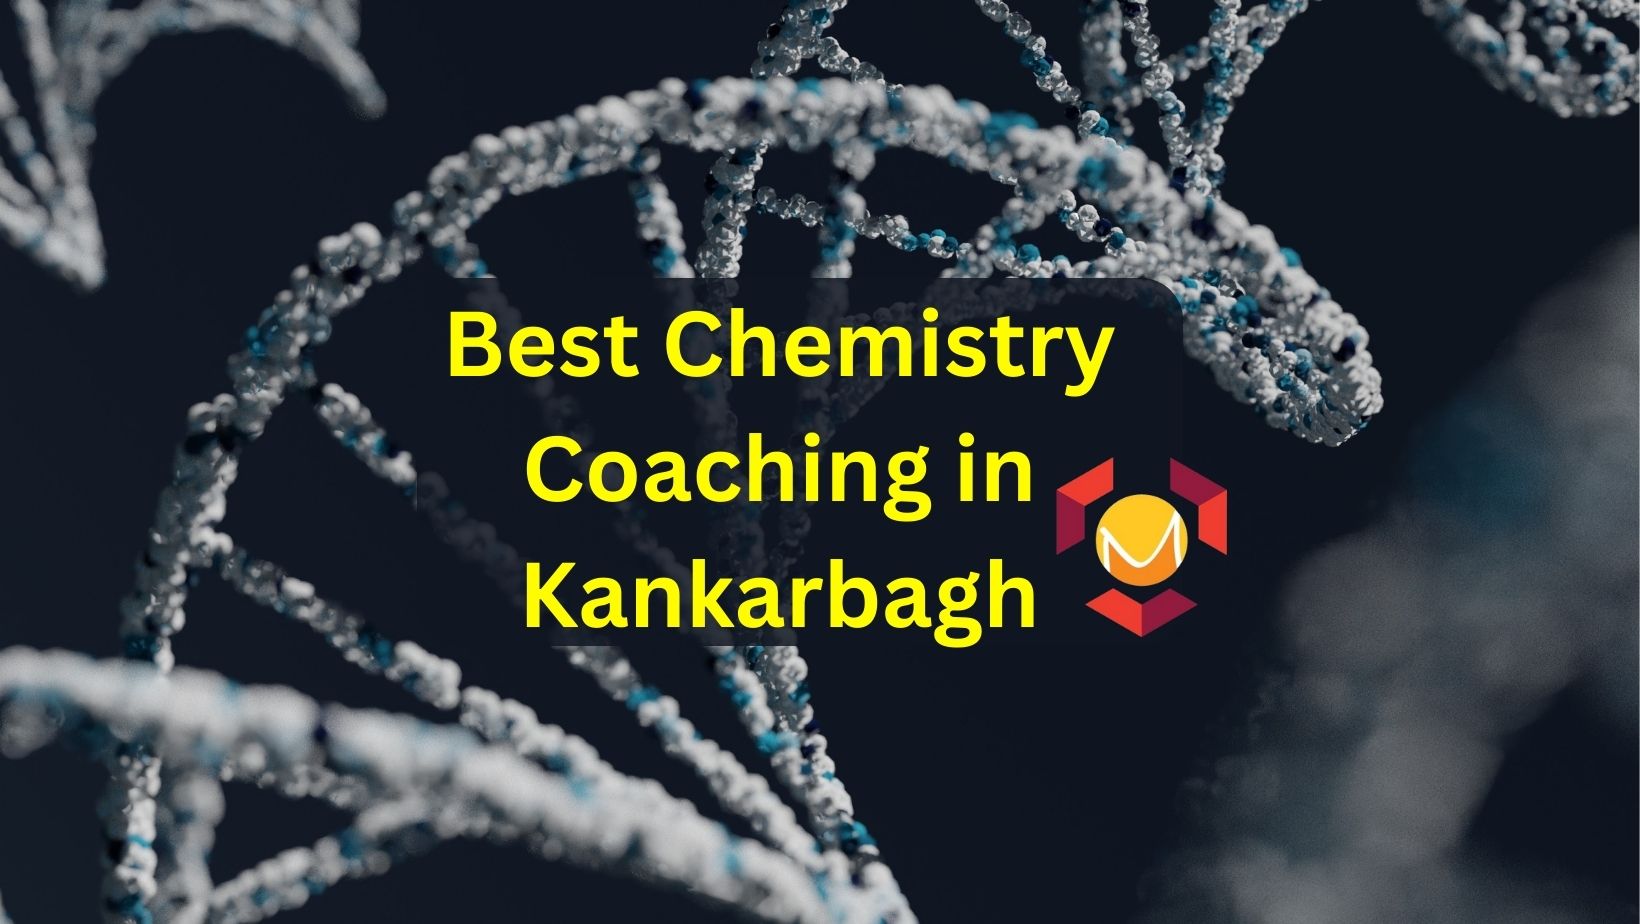 Best Chemistry Coaching in Kankarbagh